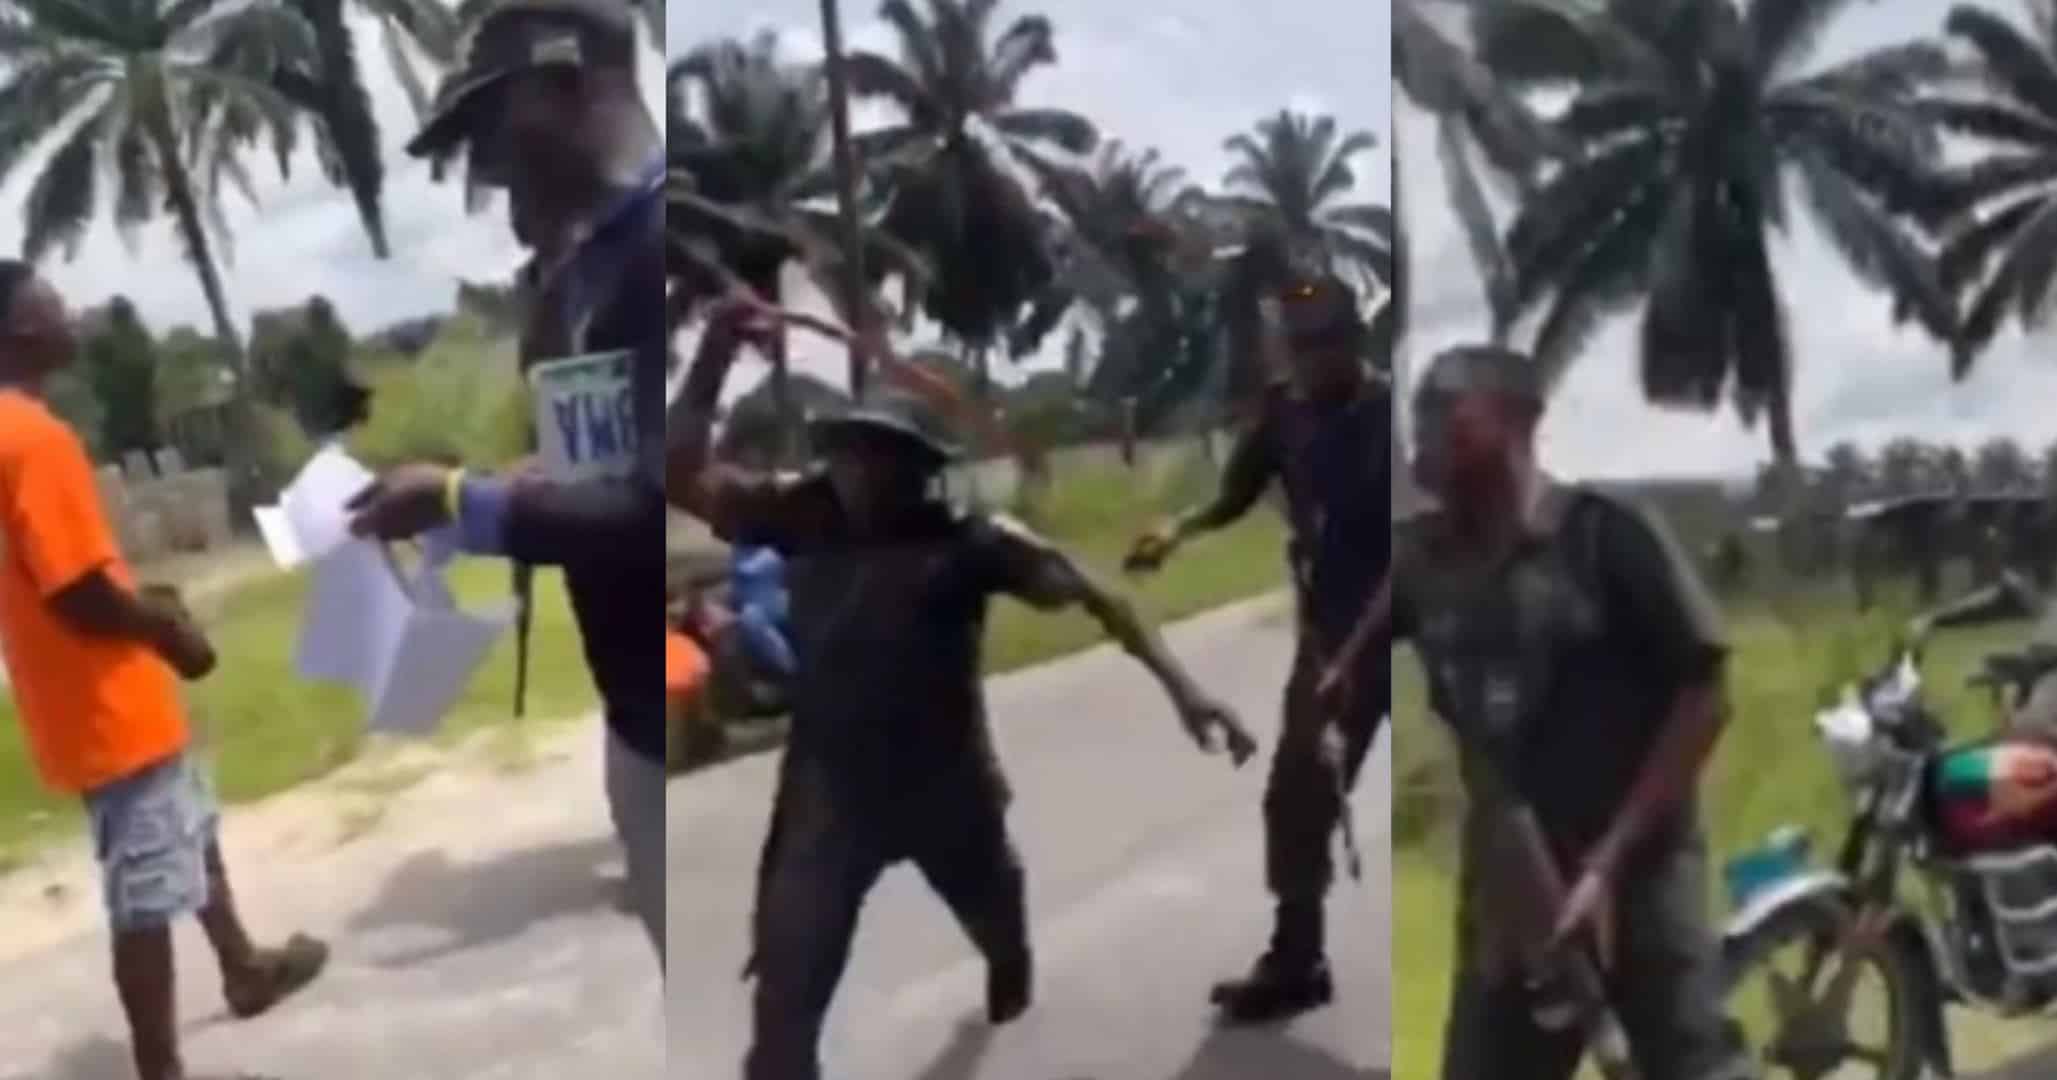 Policemen brutalize young man, threaten to end his life over N100 bribe (Video)